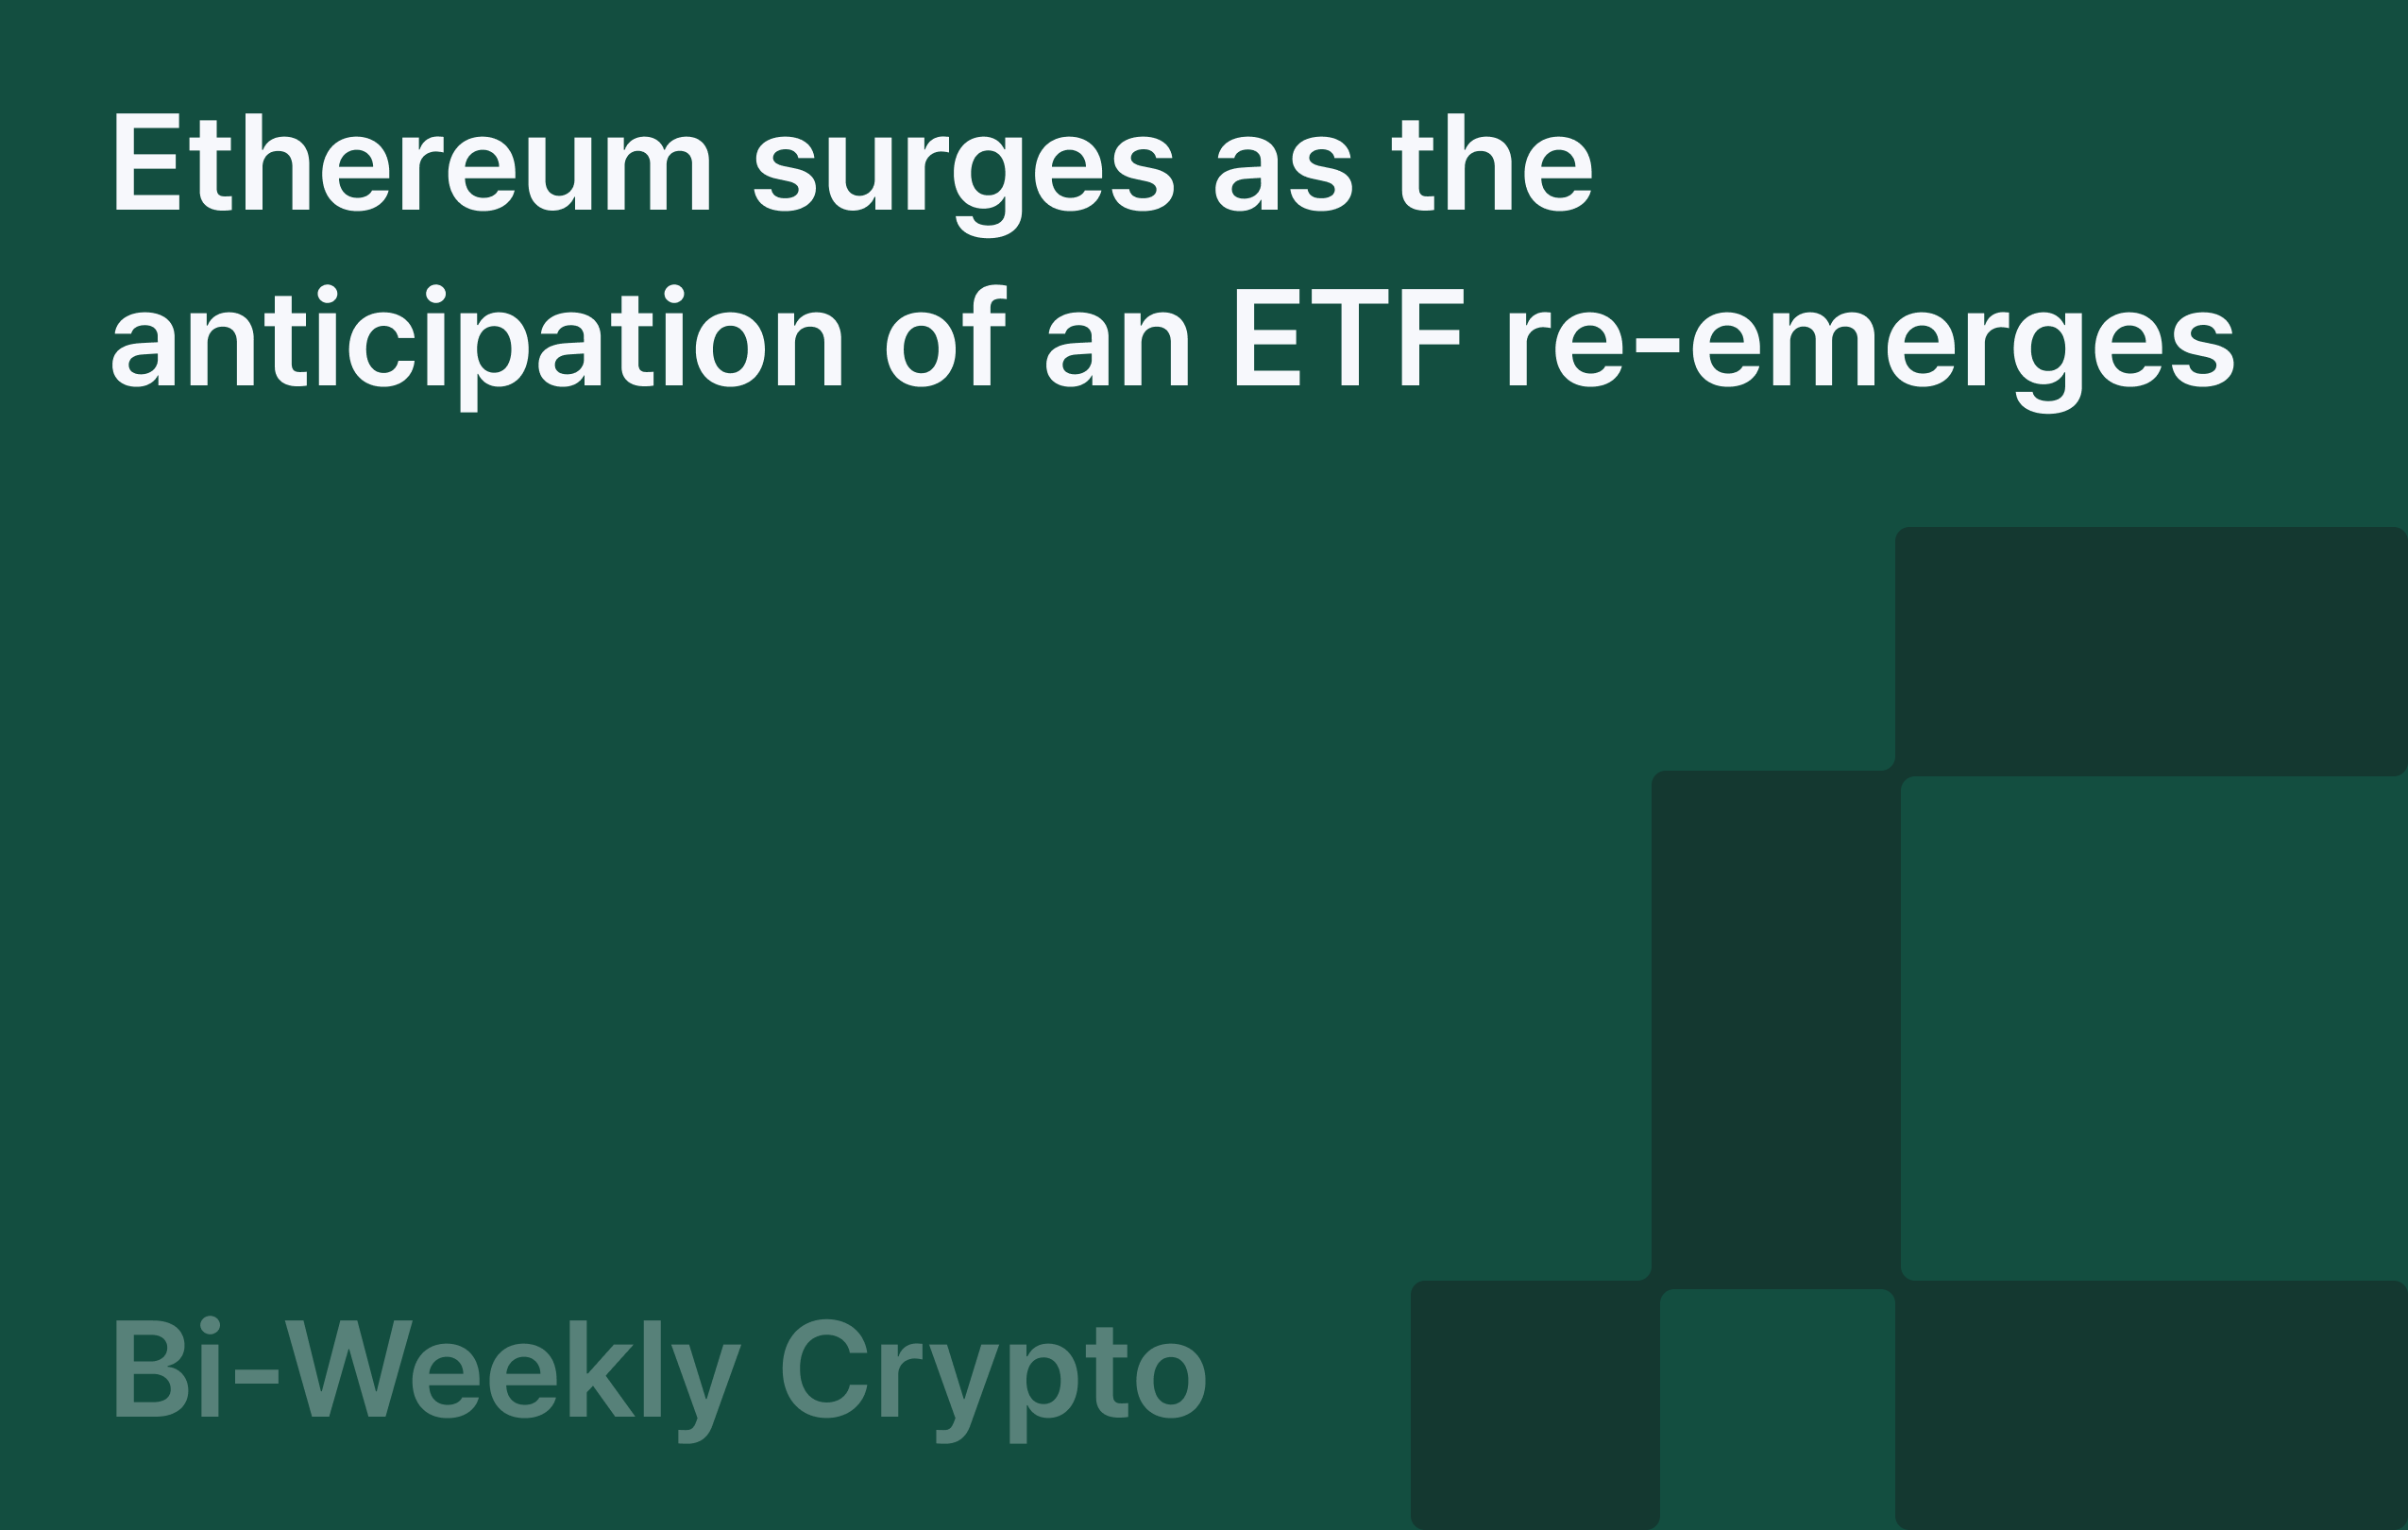 Bi-Weekly Crypto: Ethereum surges as the anticipation of an ETF re-emerges